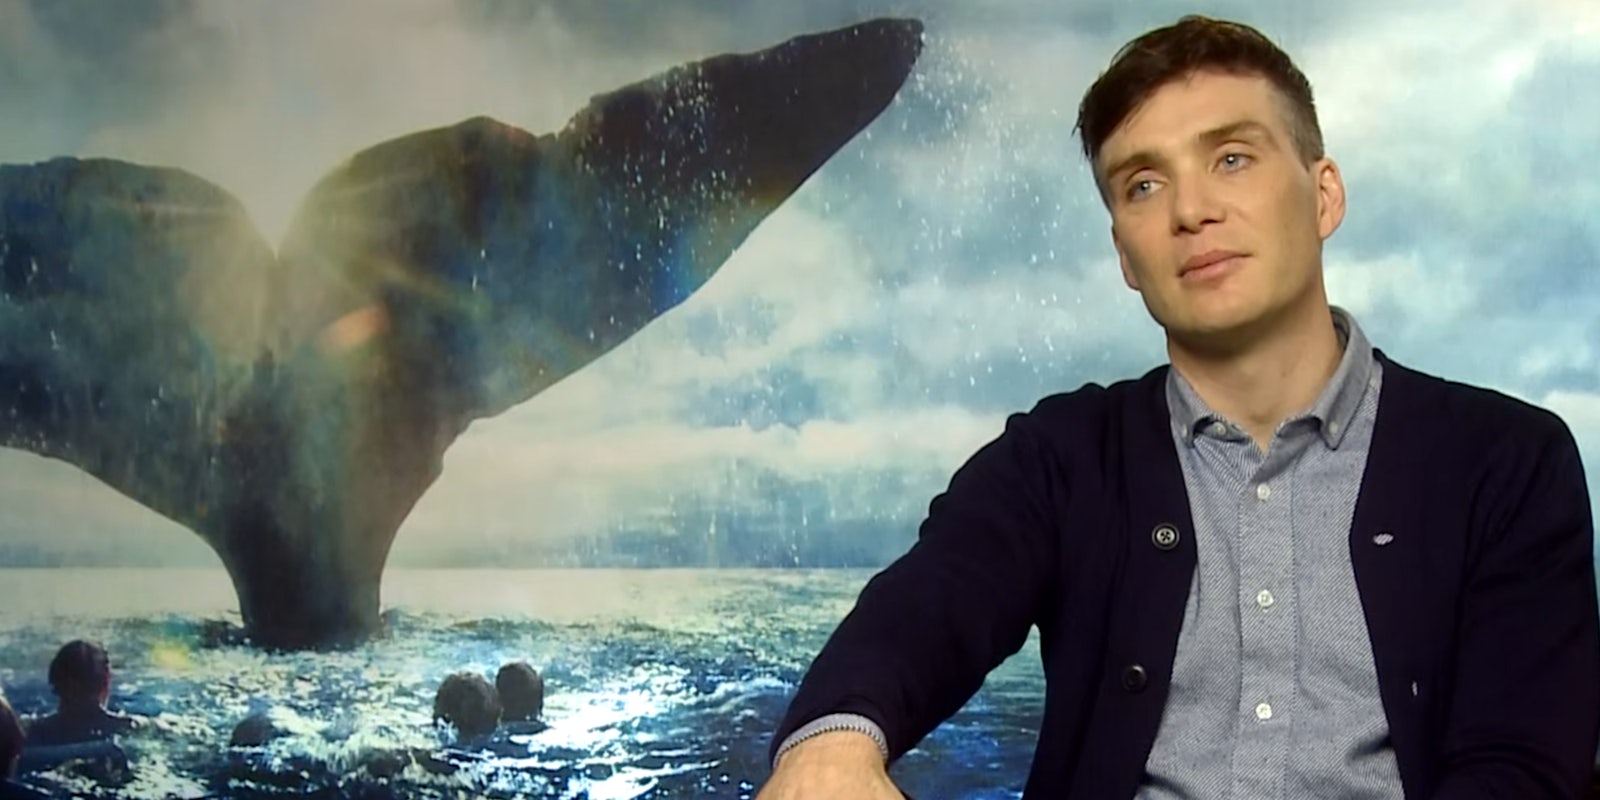 What is the disappointed Cillian Murphy meme?